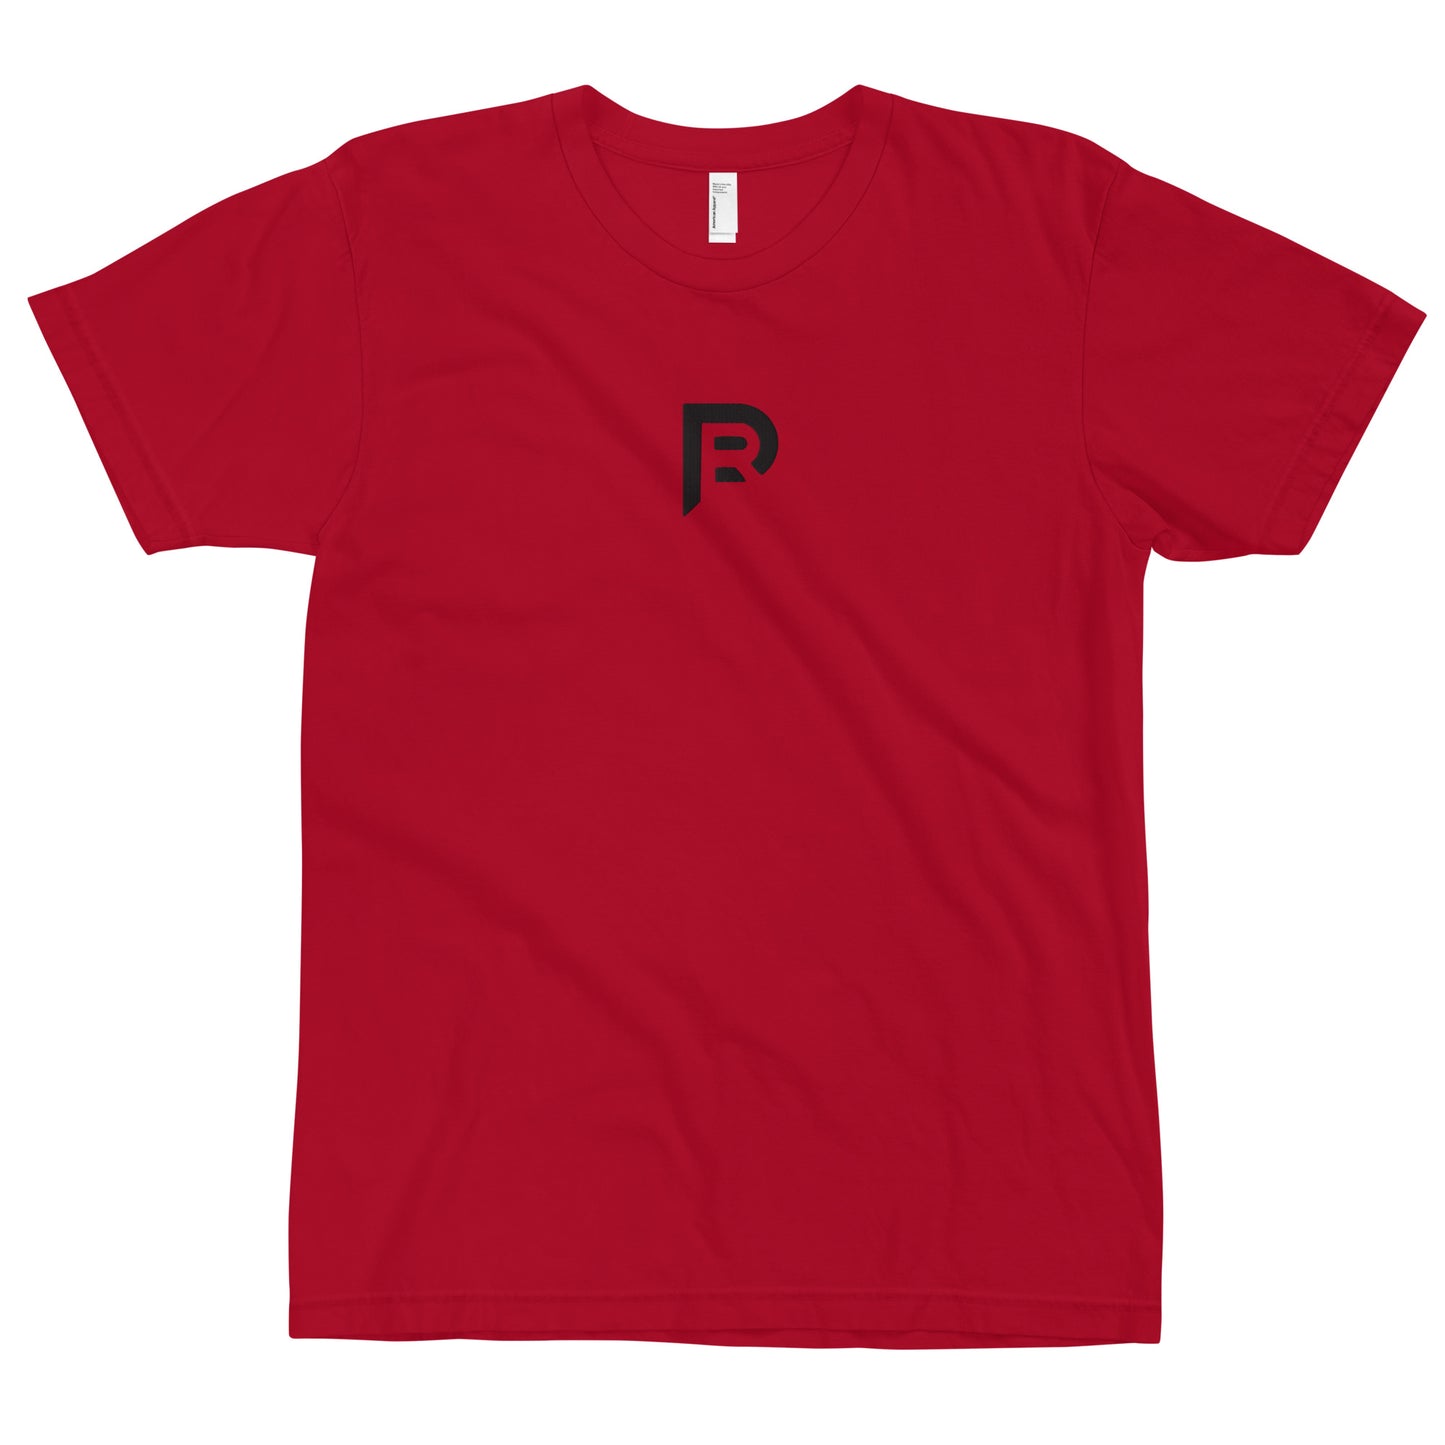 Red Weapon Future T-Shirt